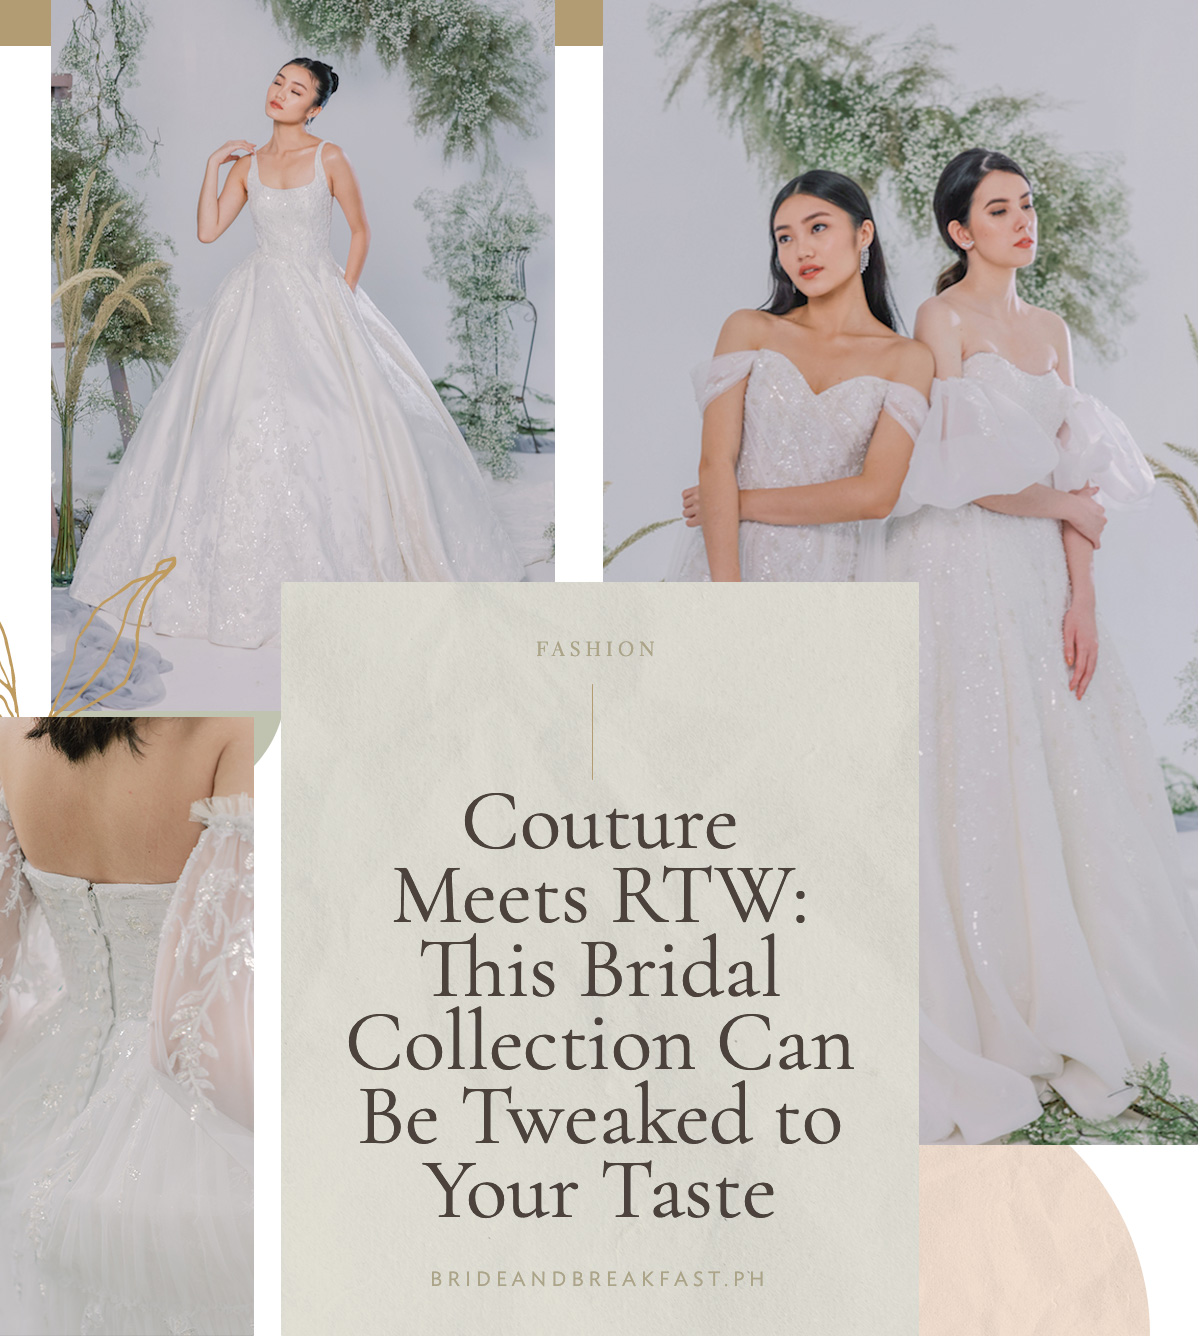 Couture Meets RTW: This Bridal Collection Can Be Tweaked to Your Taste